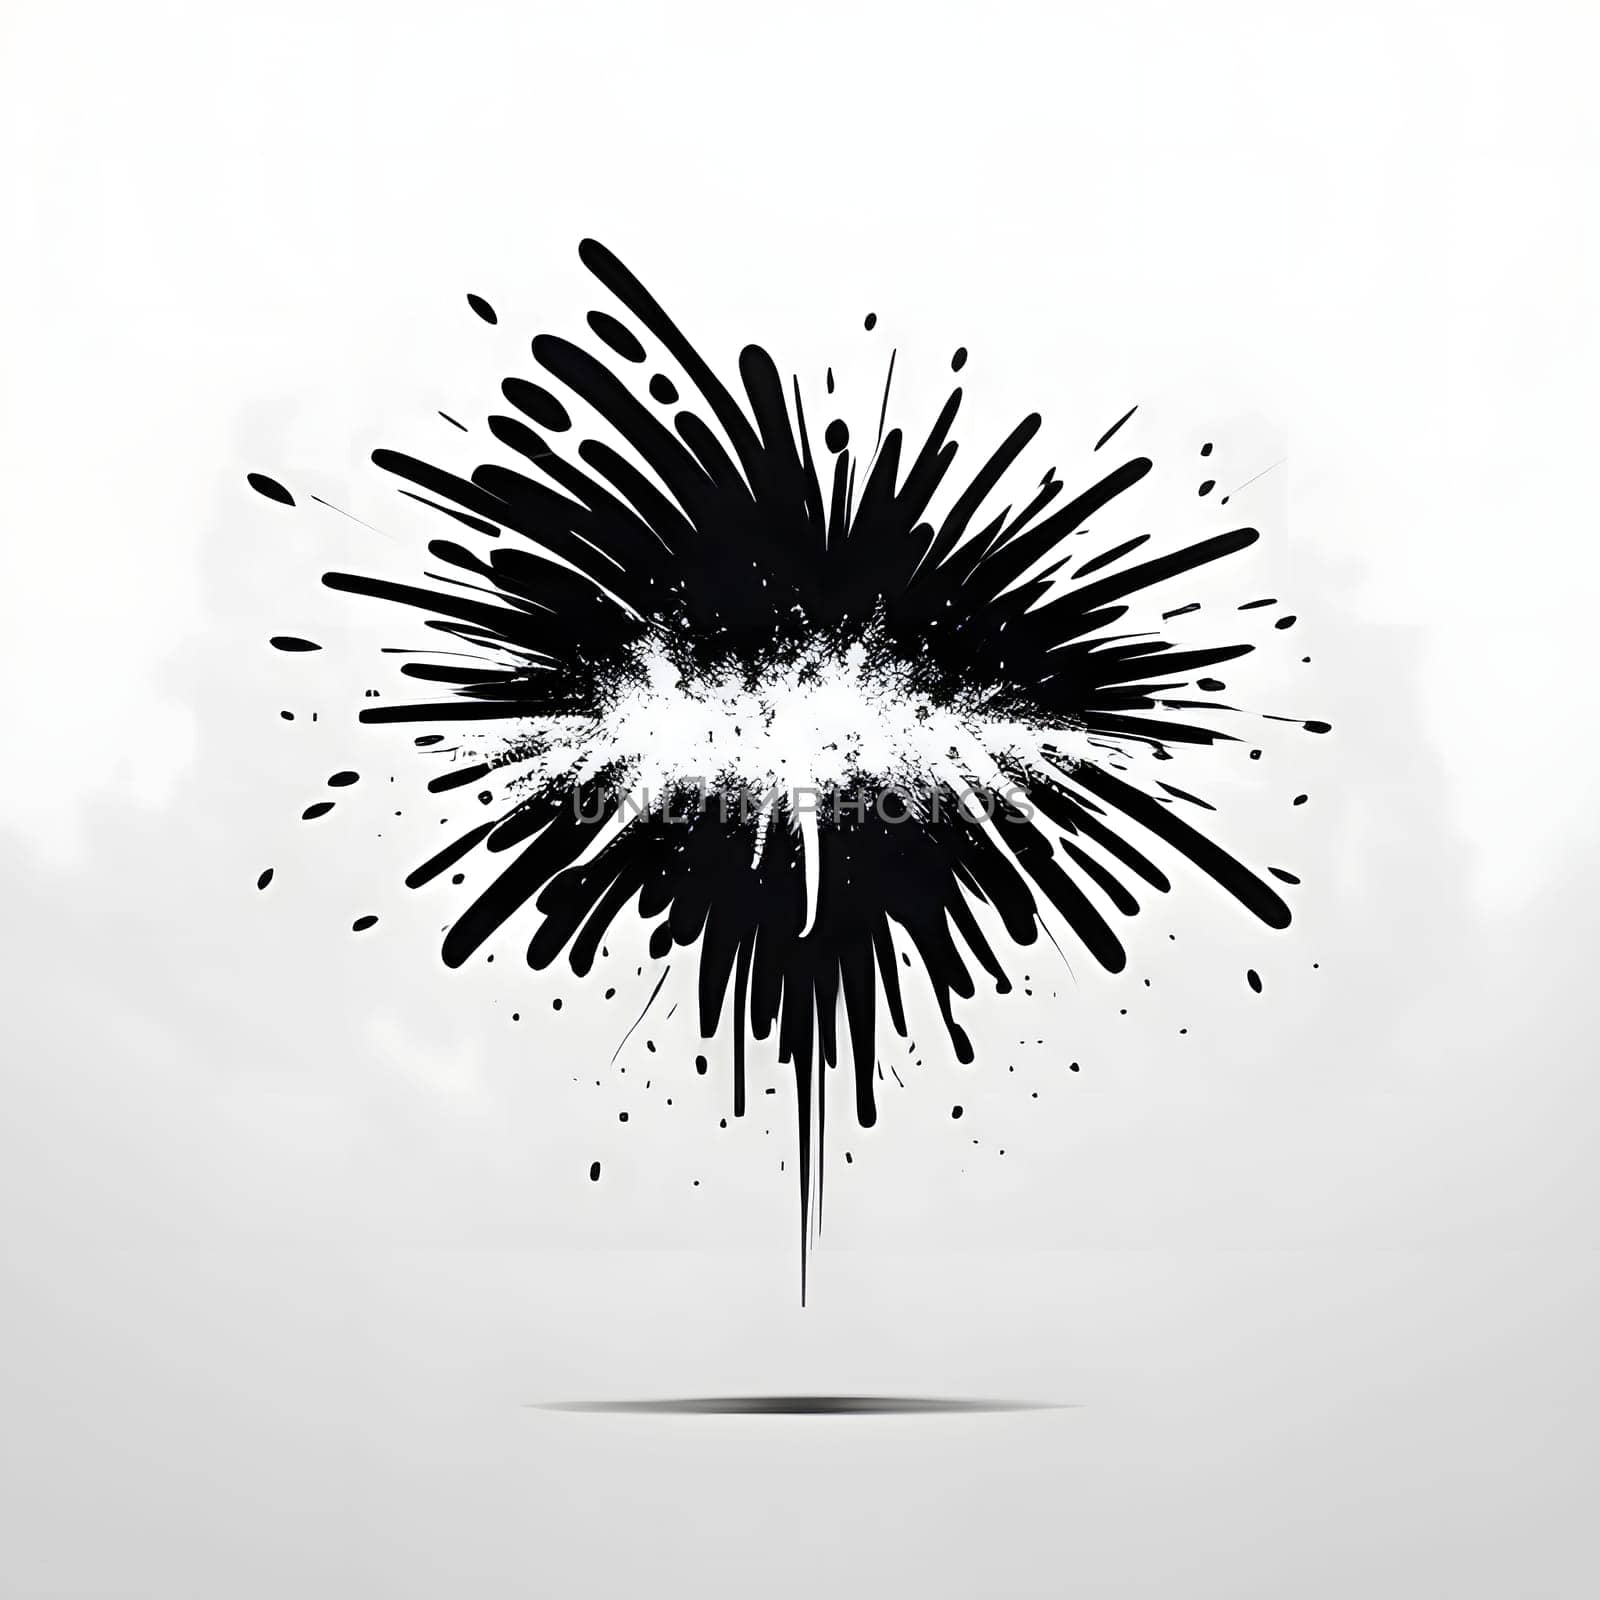 Logo, modern concept, fireworks launch, black and white. New Year's fun and festivities. A time of celebration and resolutions.